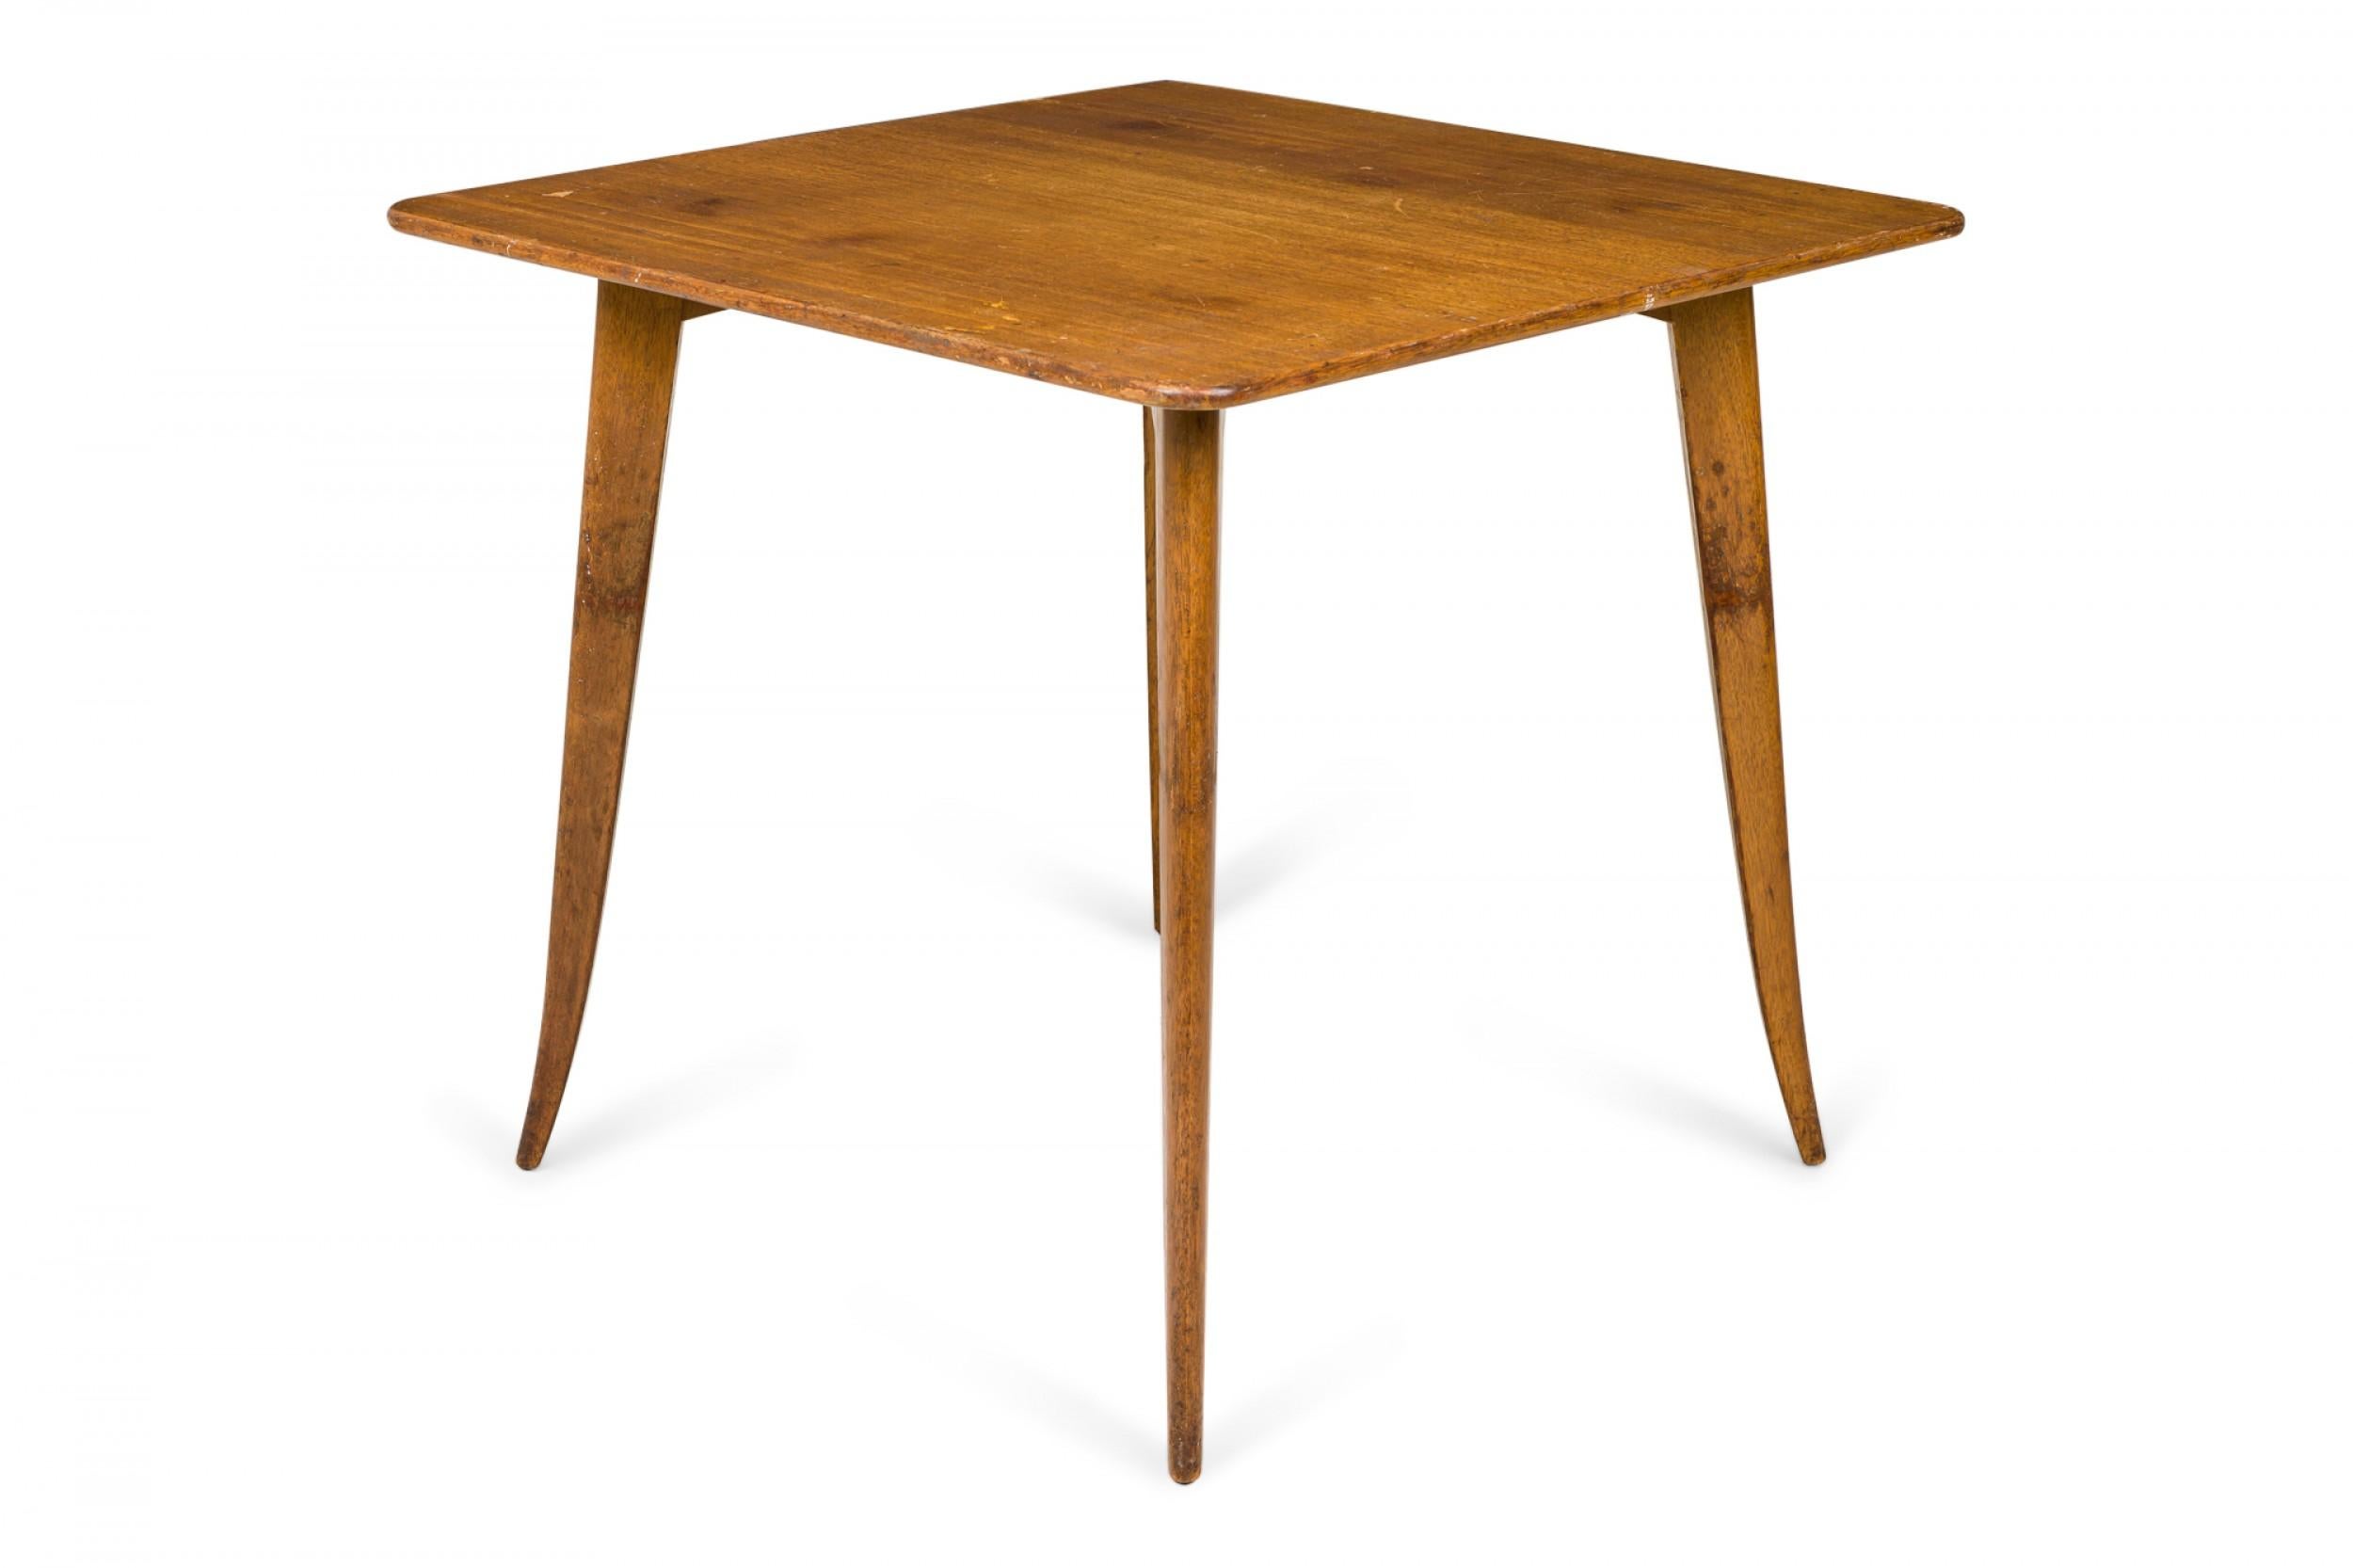 American mid-century wooden game table with a square tabletop with rounded corners, resting on four sabre legs. (EDWARD J WORMLEY FOR DUNBAR FURNITURE COMPANY)